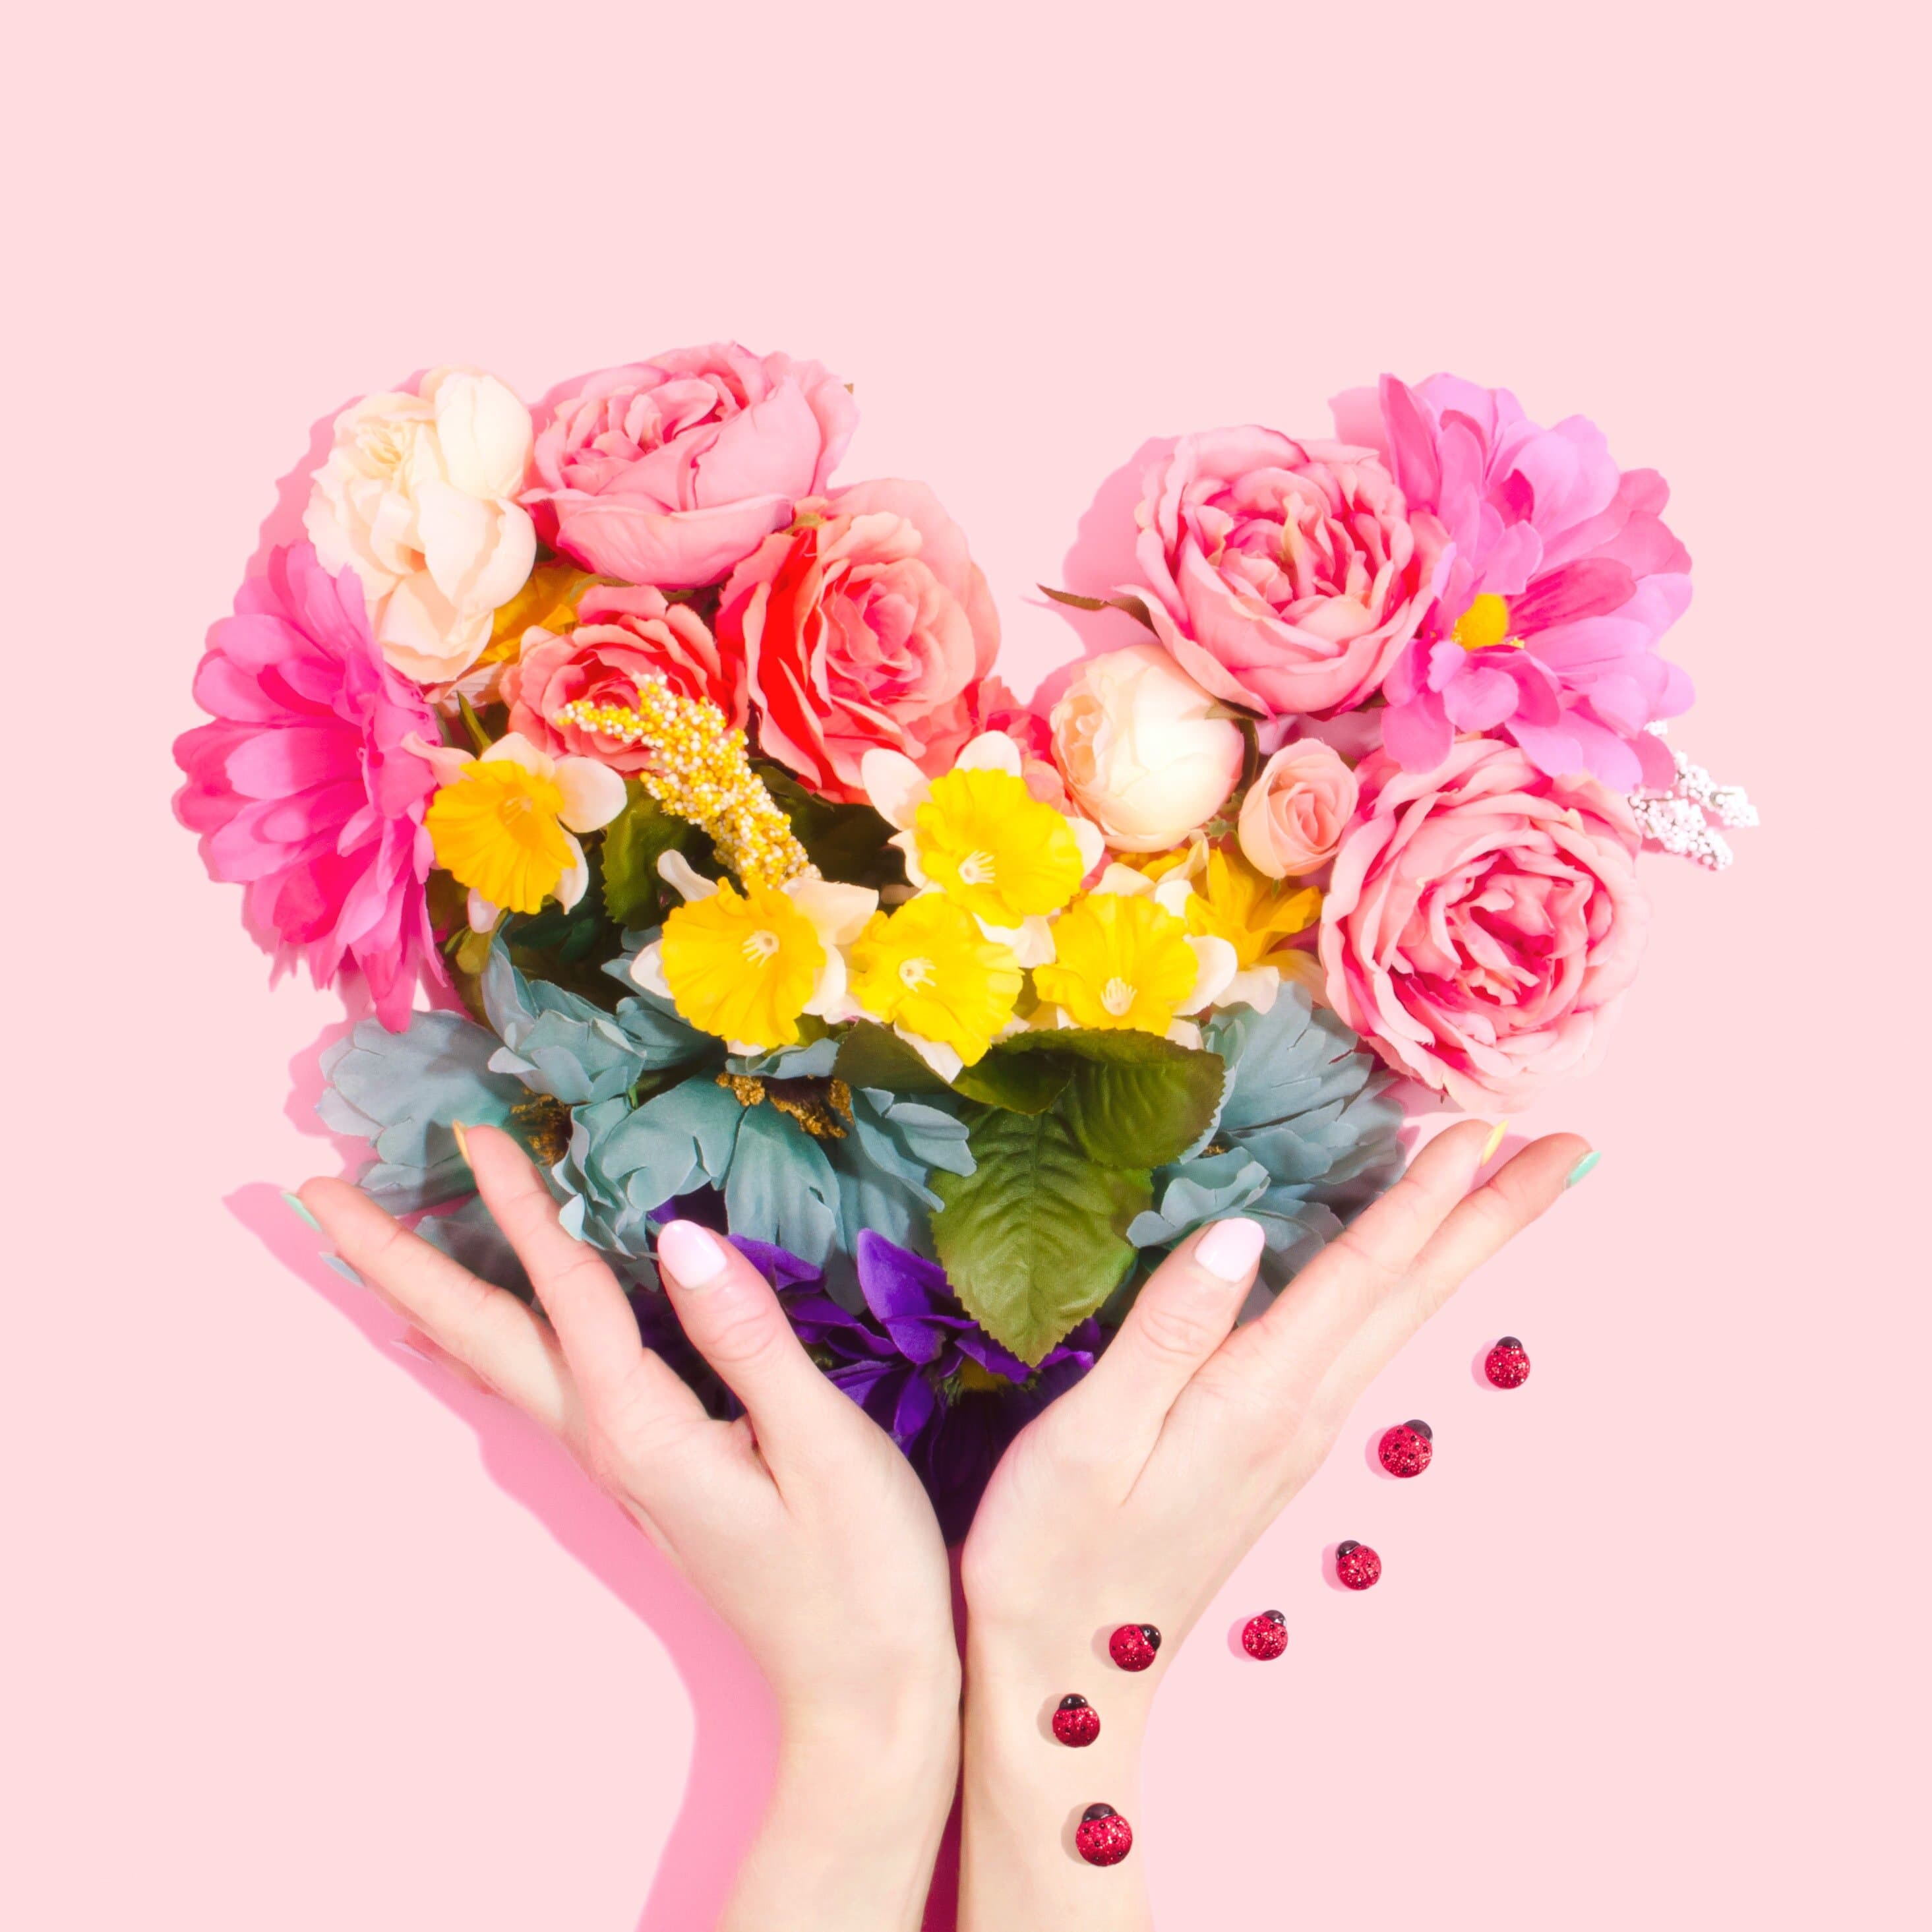 Top 10 Valentine’s Day Flower Arrangements That Can Say It Better